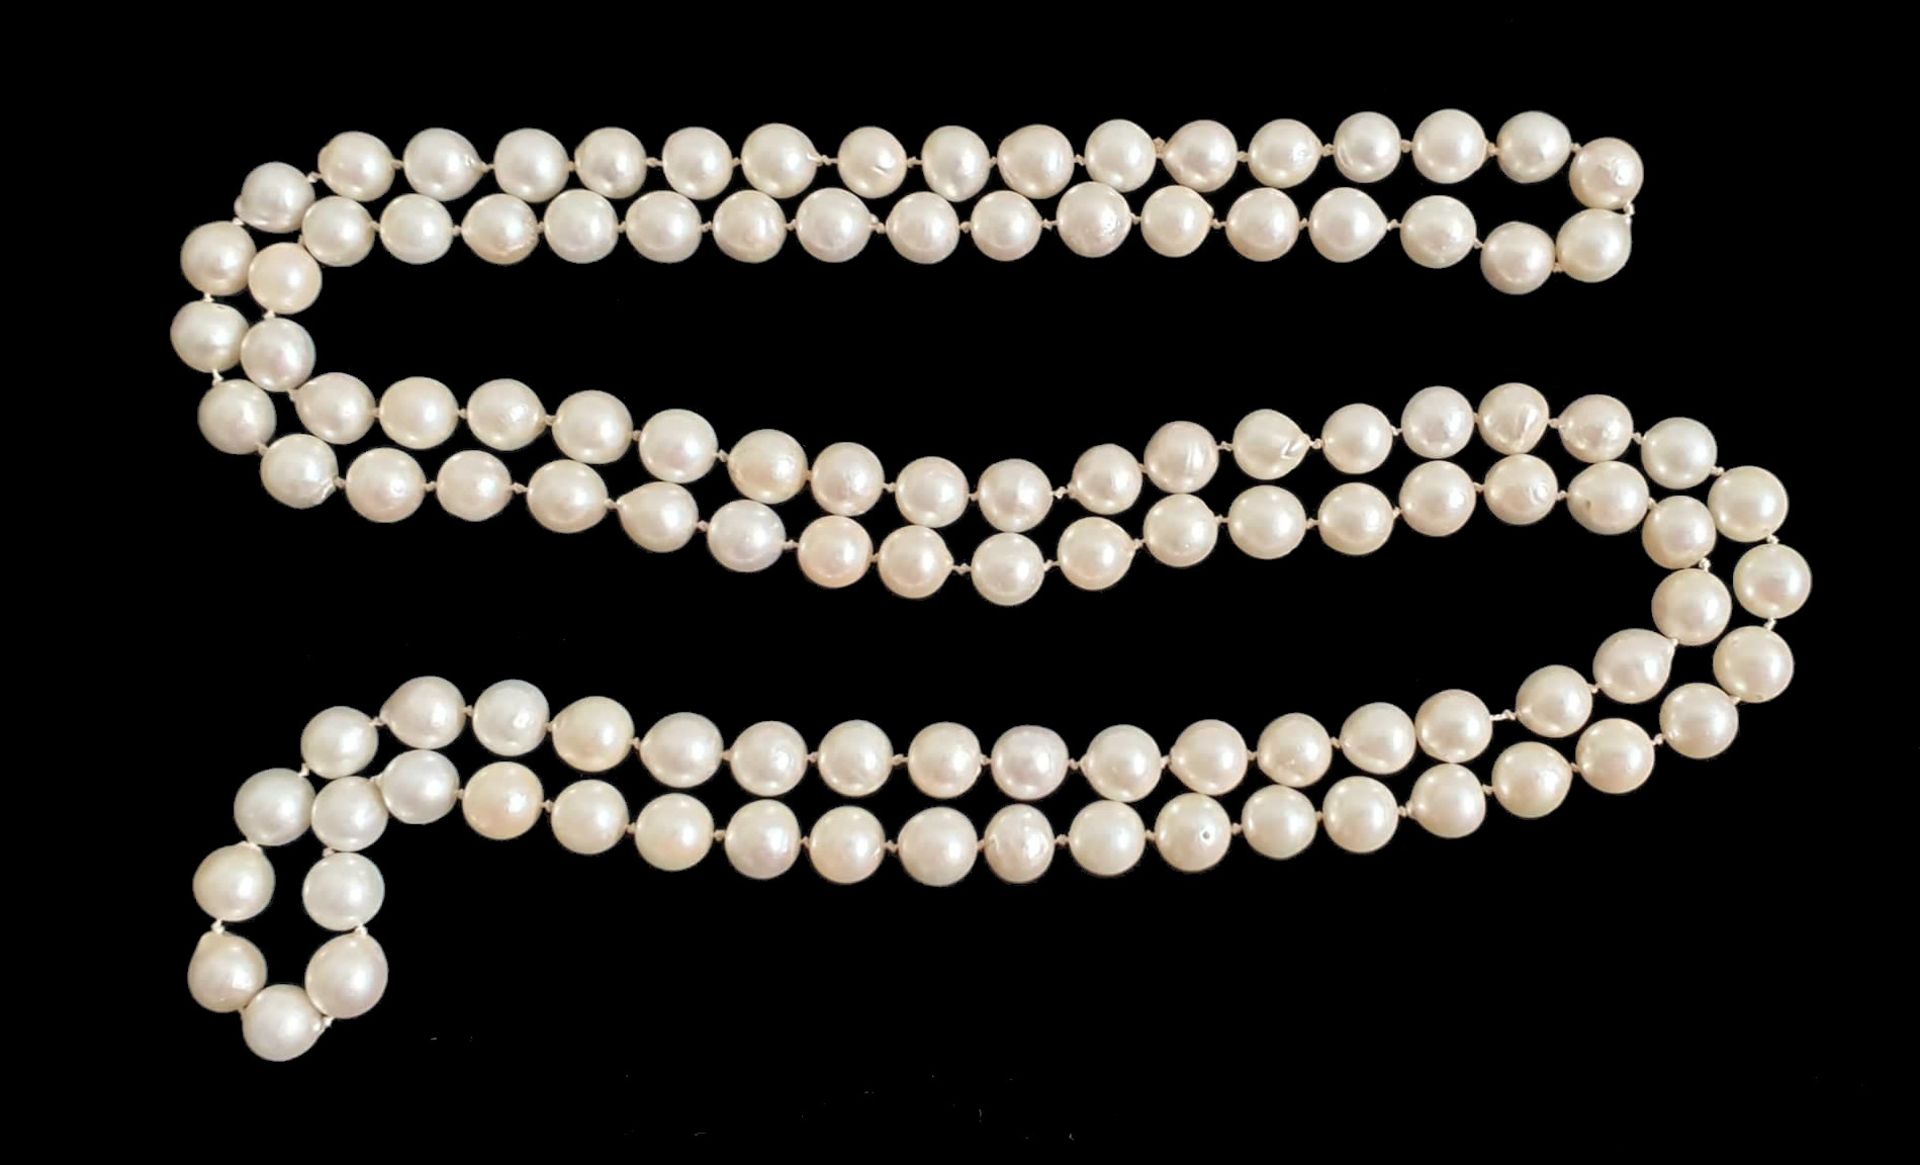 Akoya Pearl necklace - Image 2 of 3